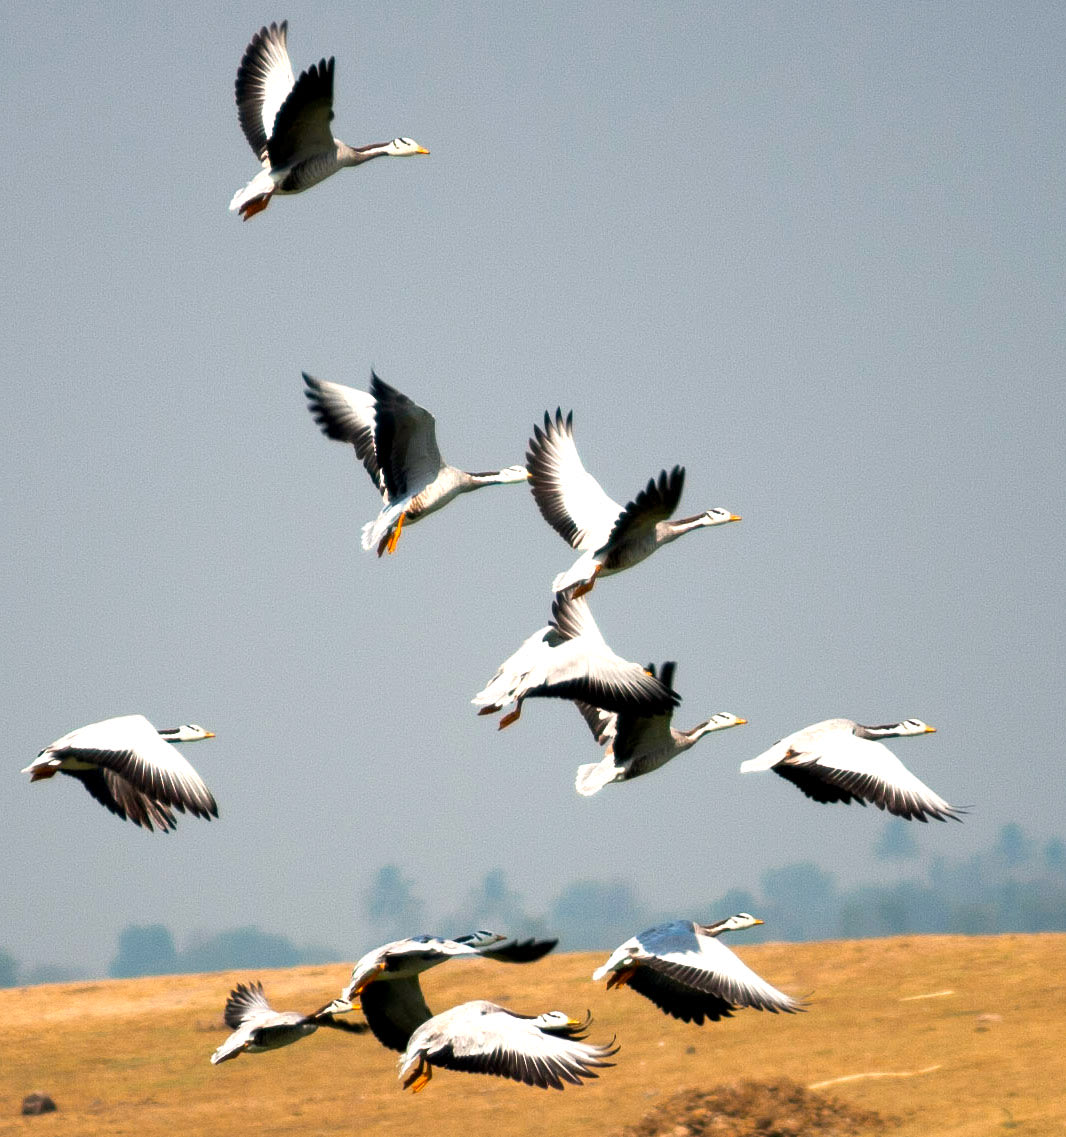 Bar-headed geese can cover distances of up to 1,000 km in a single day. This means a bird can take flight from north India, cross the Himalayas, and land in Tibet within 24 hours. Photo: Tarun Menon
